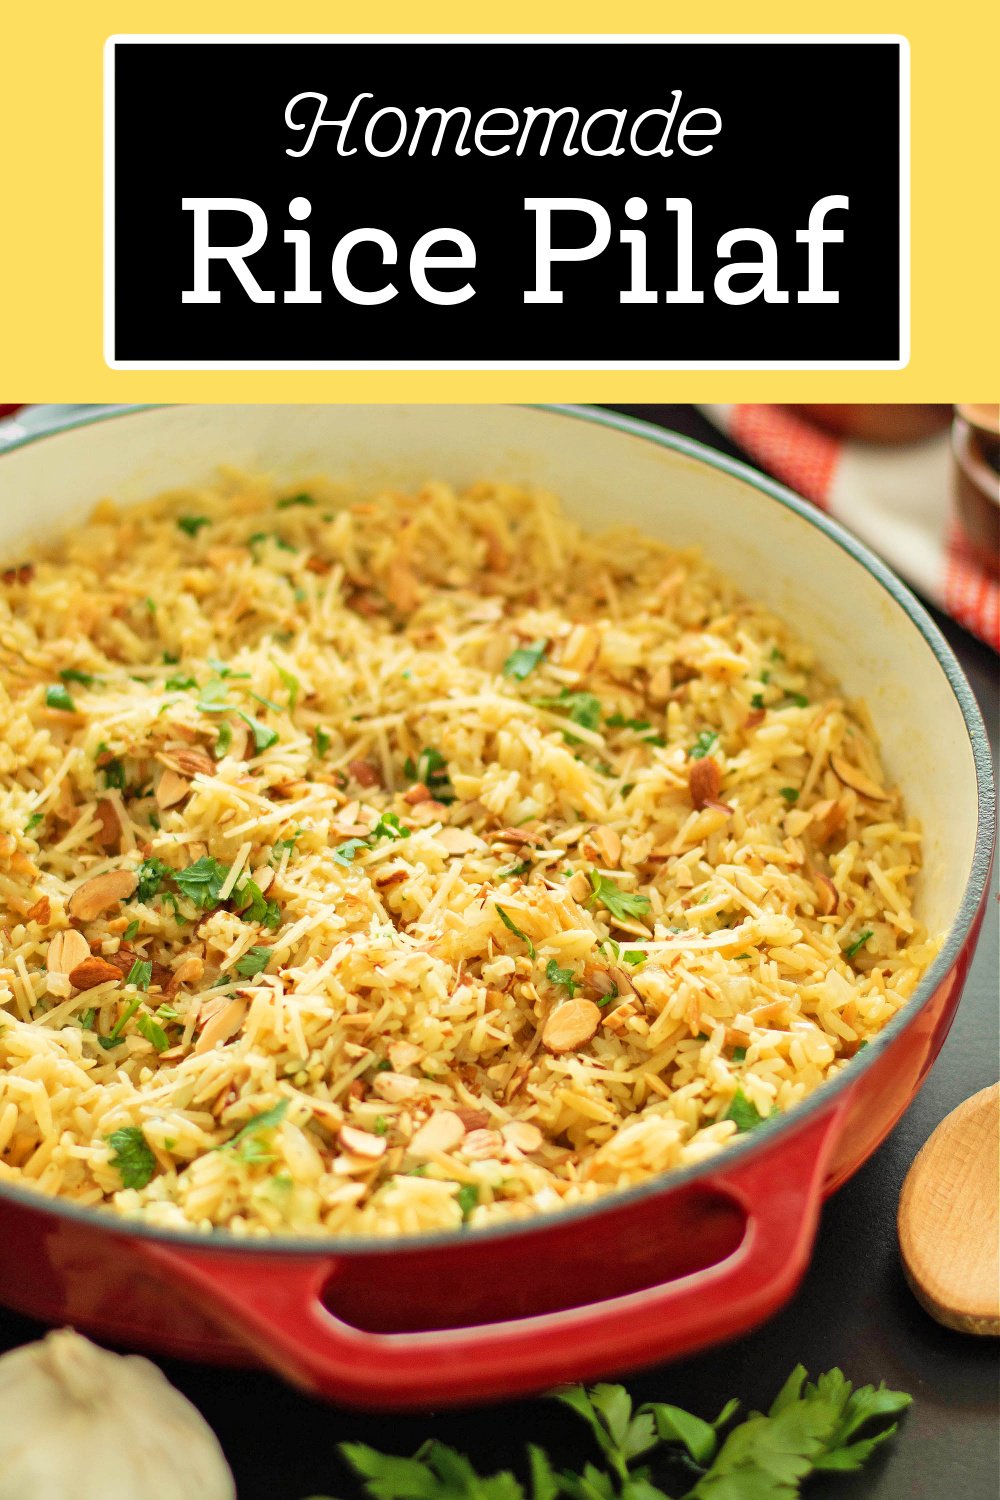 This homemade Rice Pilaf recipe features a combination of rice with toasted orzo pasta and sliced almonds for depth of flavor. #rice #ricerecipes #ricepilaf #southernsidedishes #orzorecipe #easyricerecipes via @melissasssk